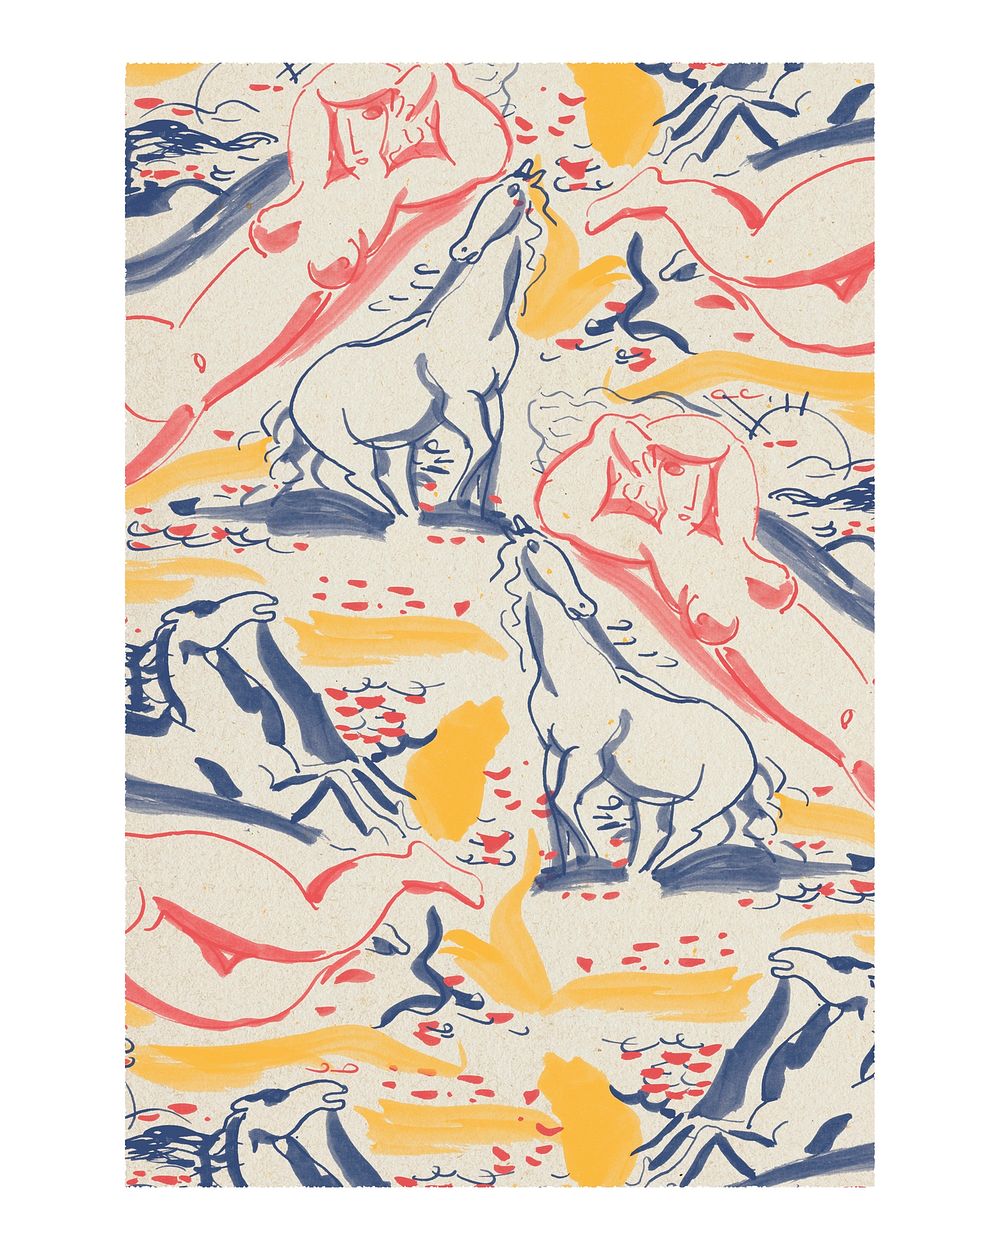 Woman and horse poster, vintage pattern design